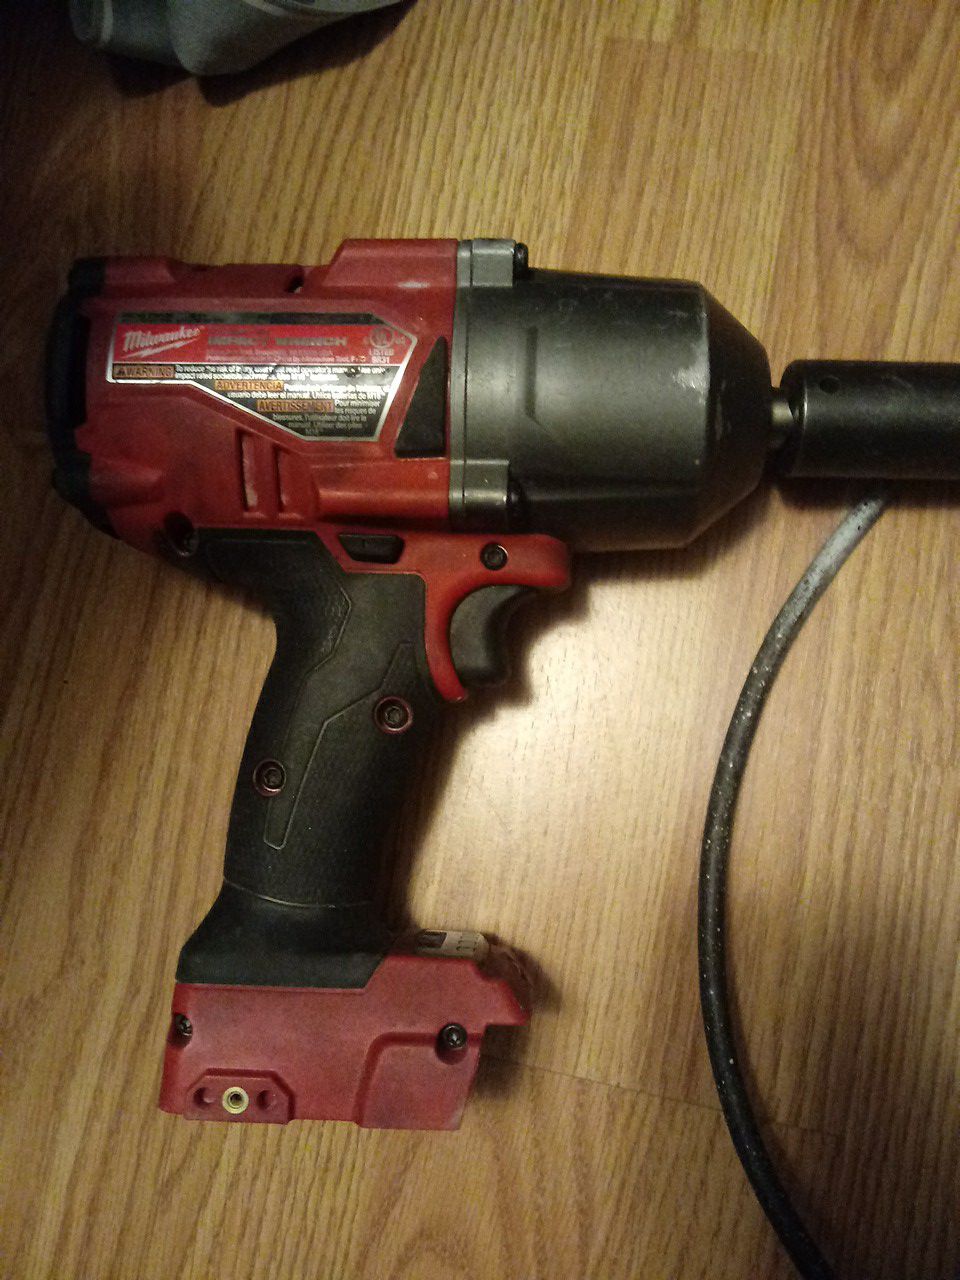 Milwakuee impact wrench does not include battery